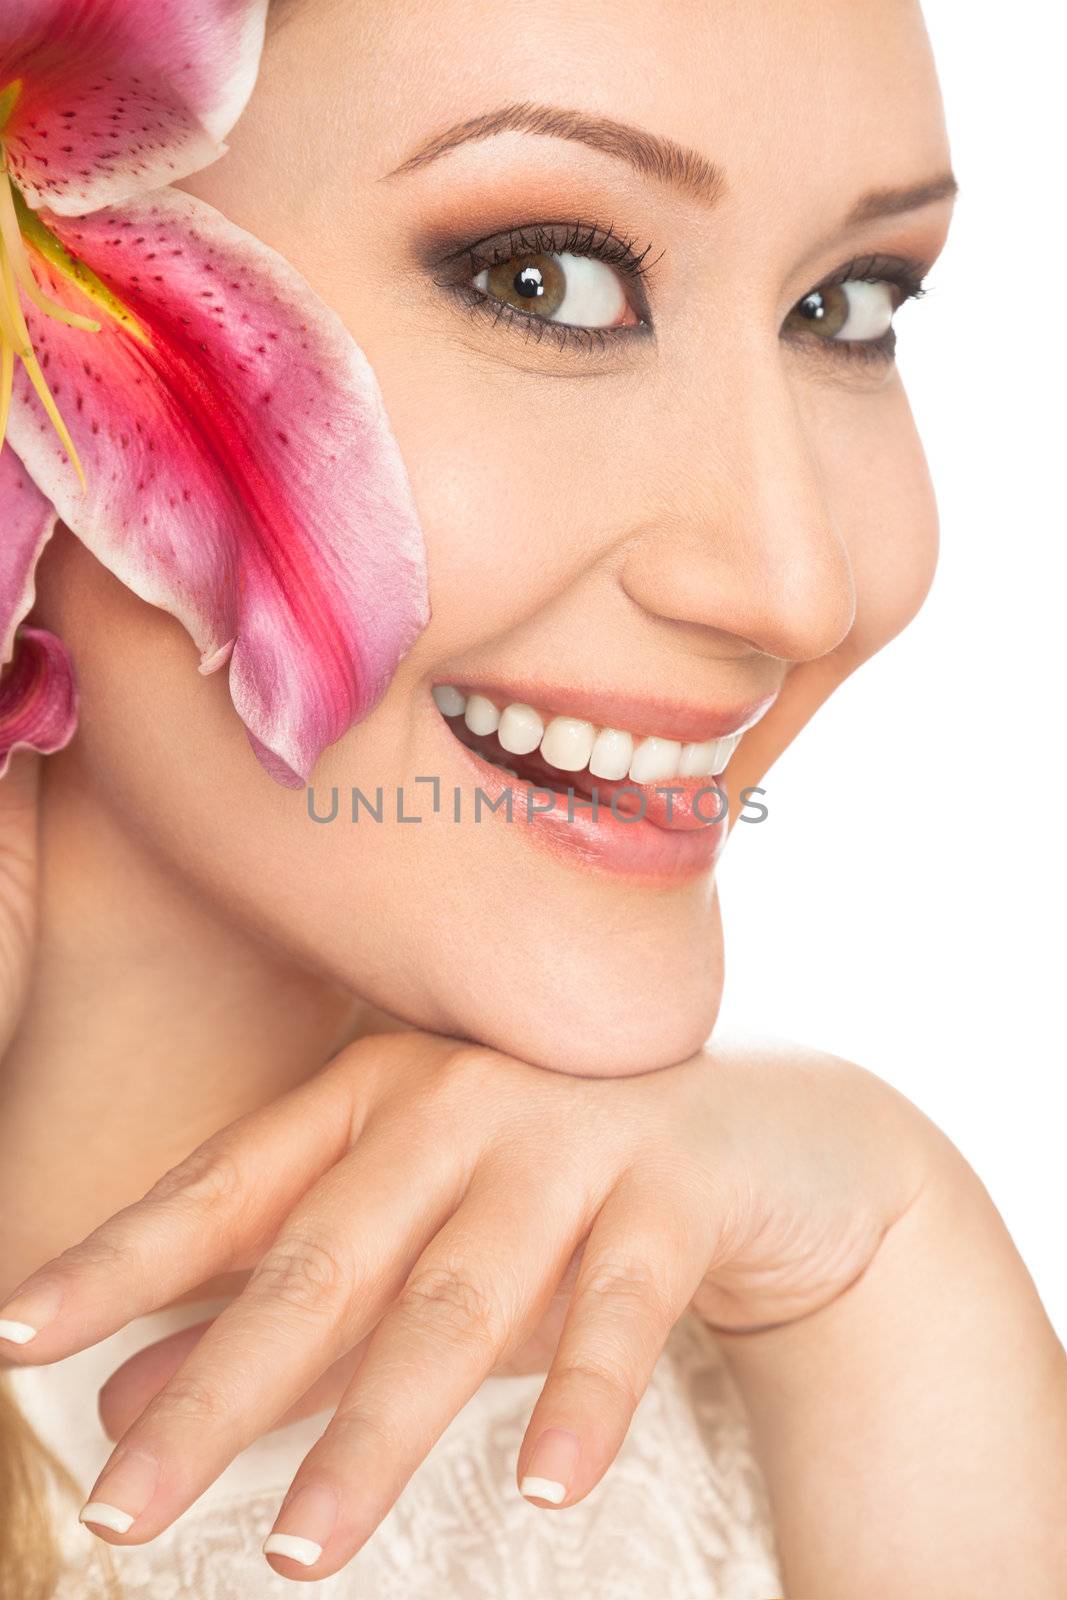 Beautiful xxl woman face smiling with tongue out, hand under chin and rose lily in hair